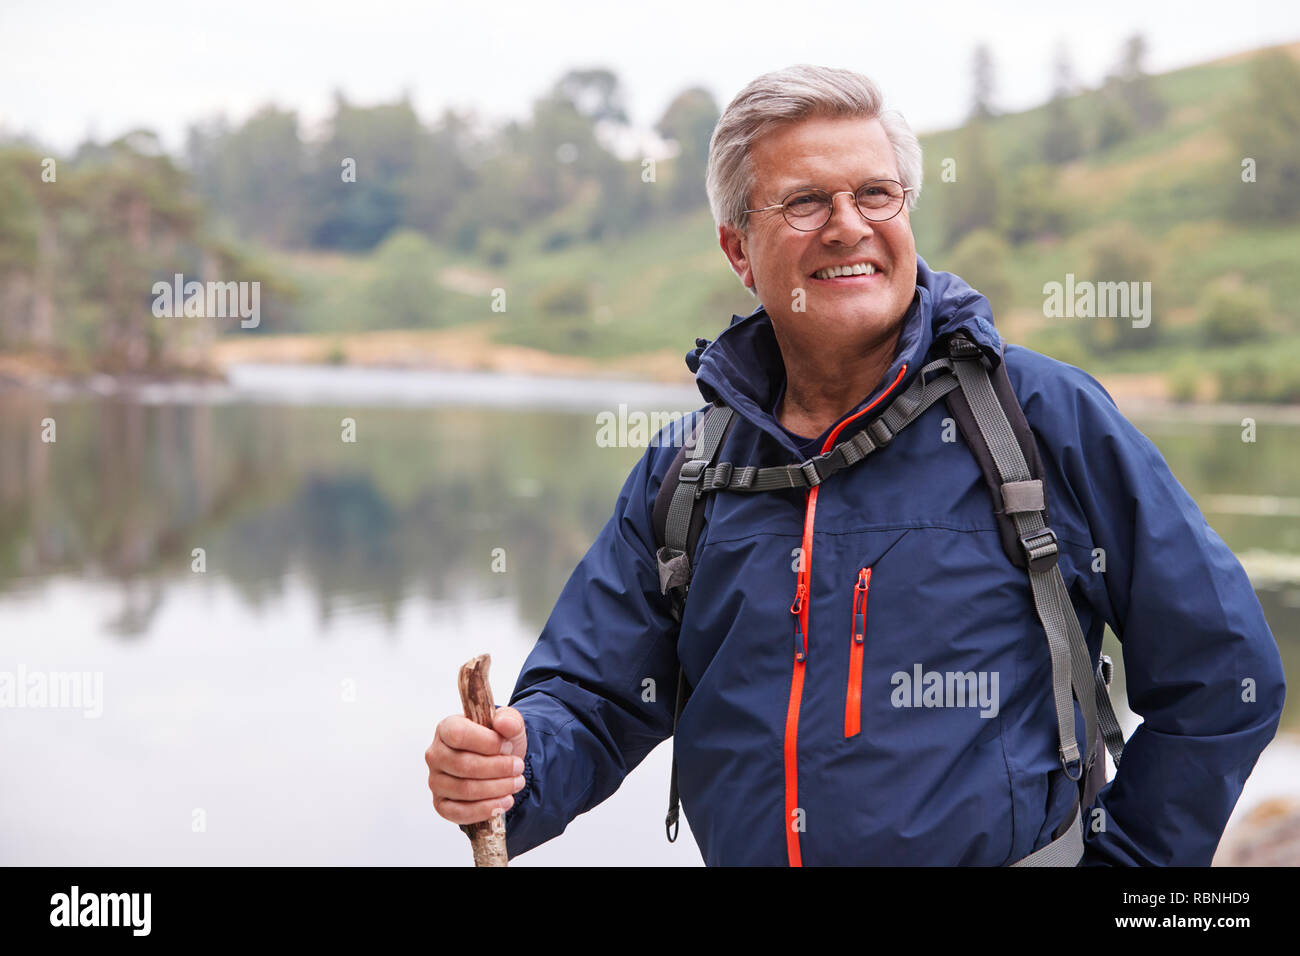 Middle aged man standing by a lake holding a stick smiling, close up, Lake District, UK Stock Photo